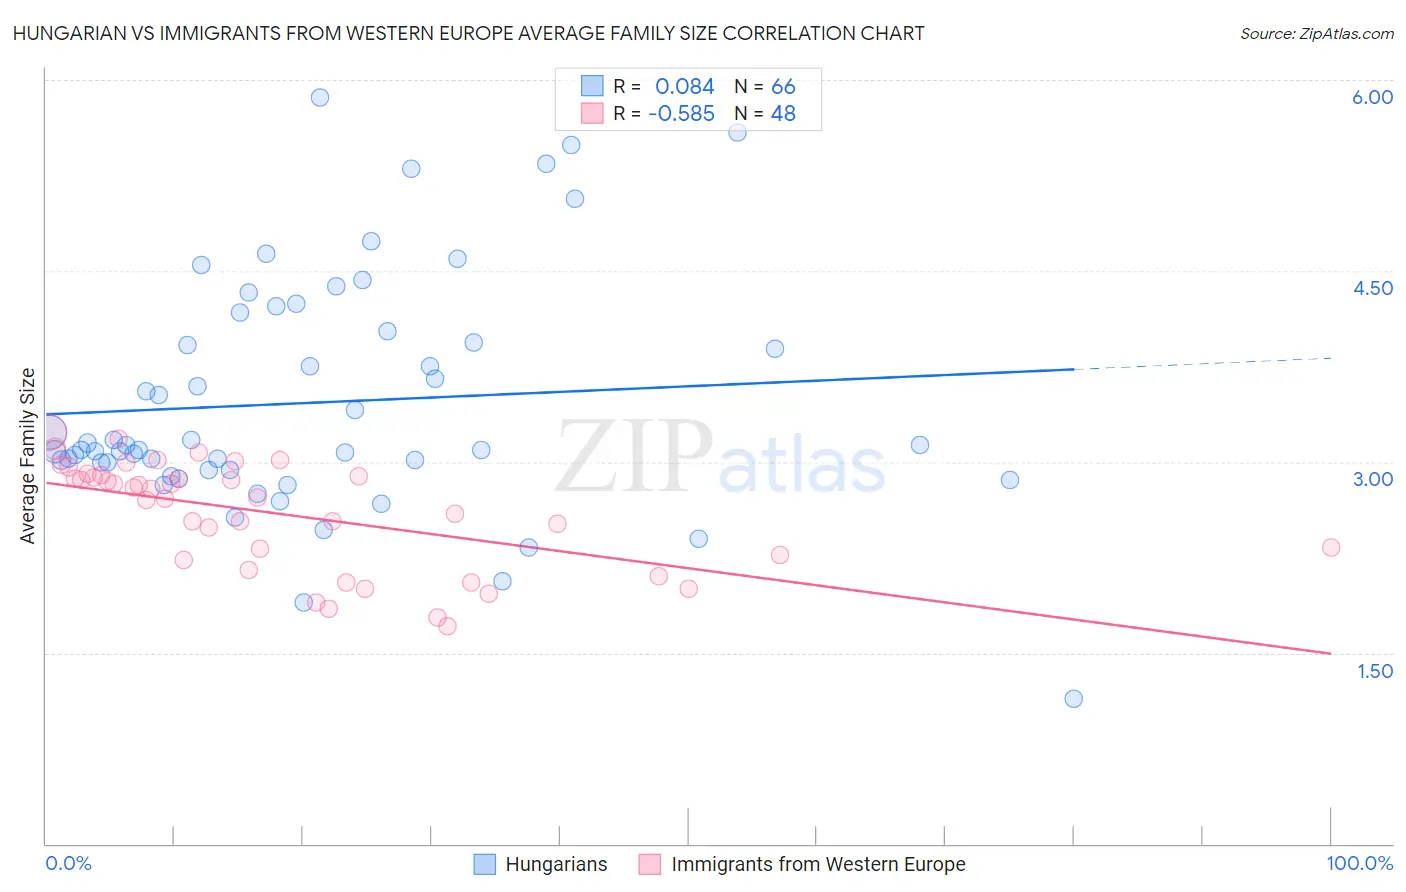 Hungarian vs Immigrants from Western Europe Average Family Size